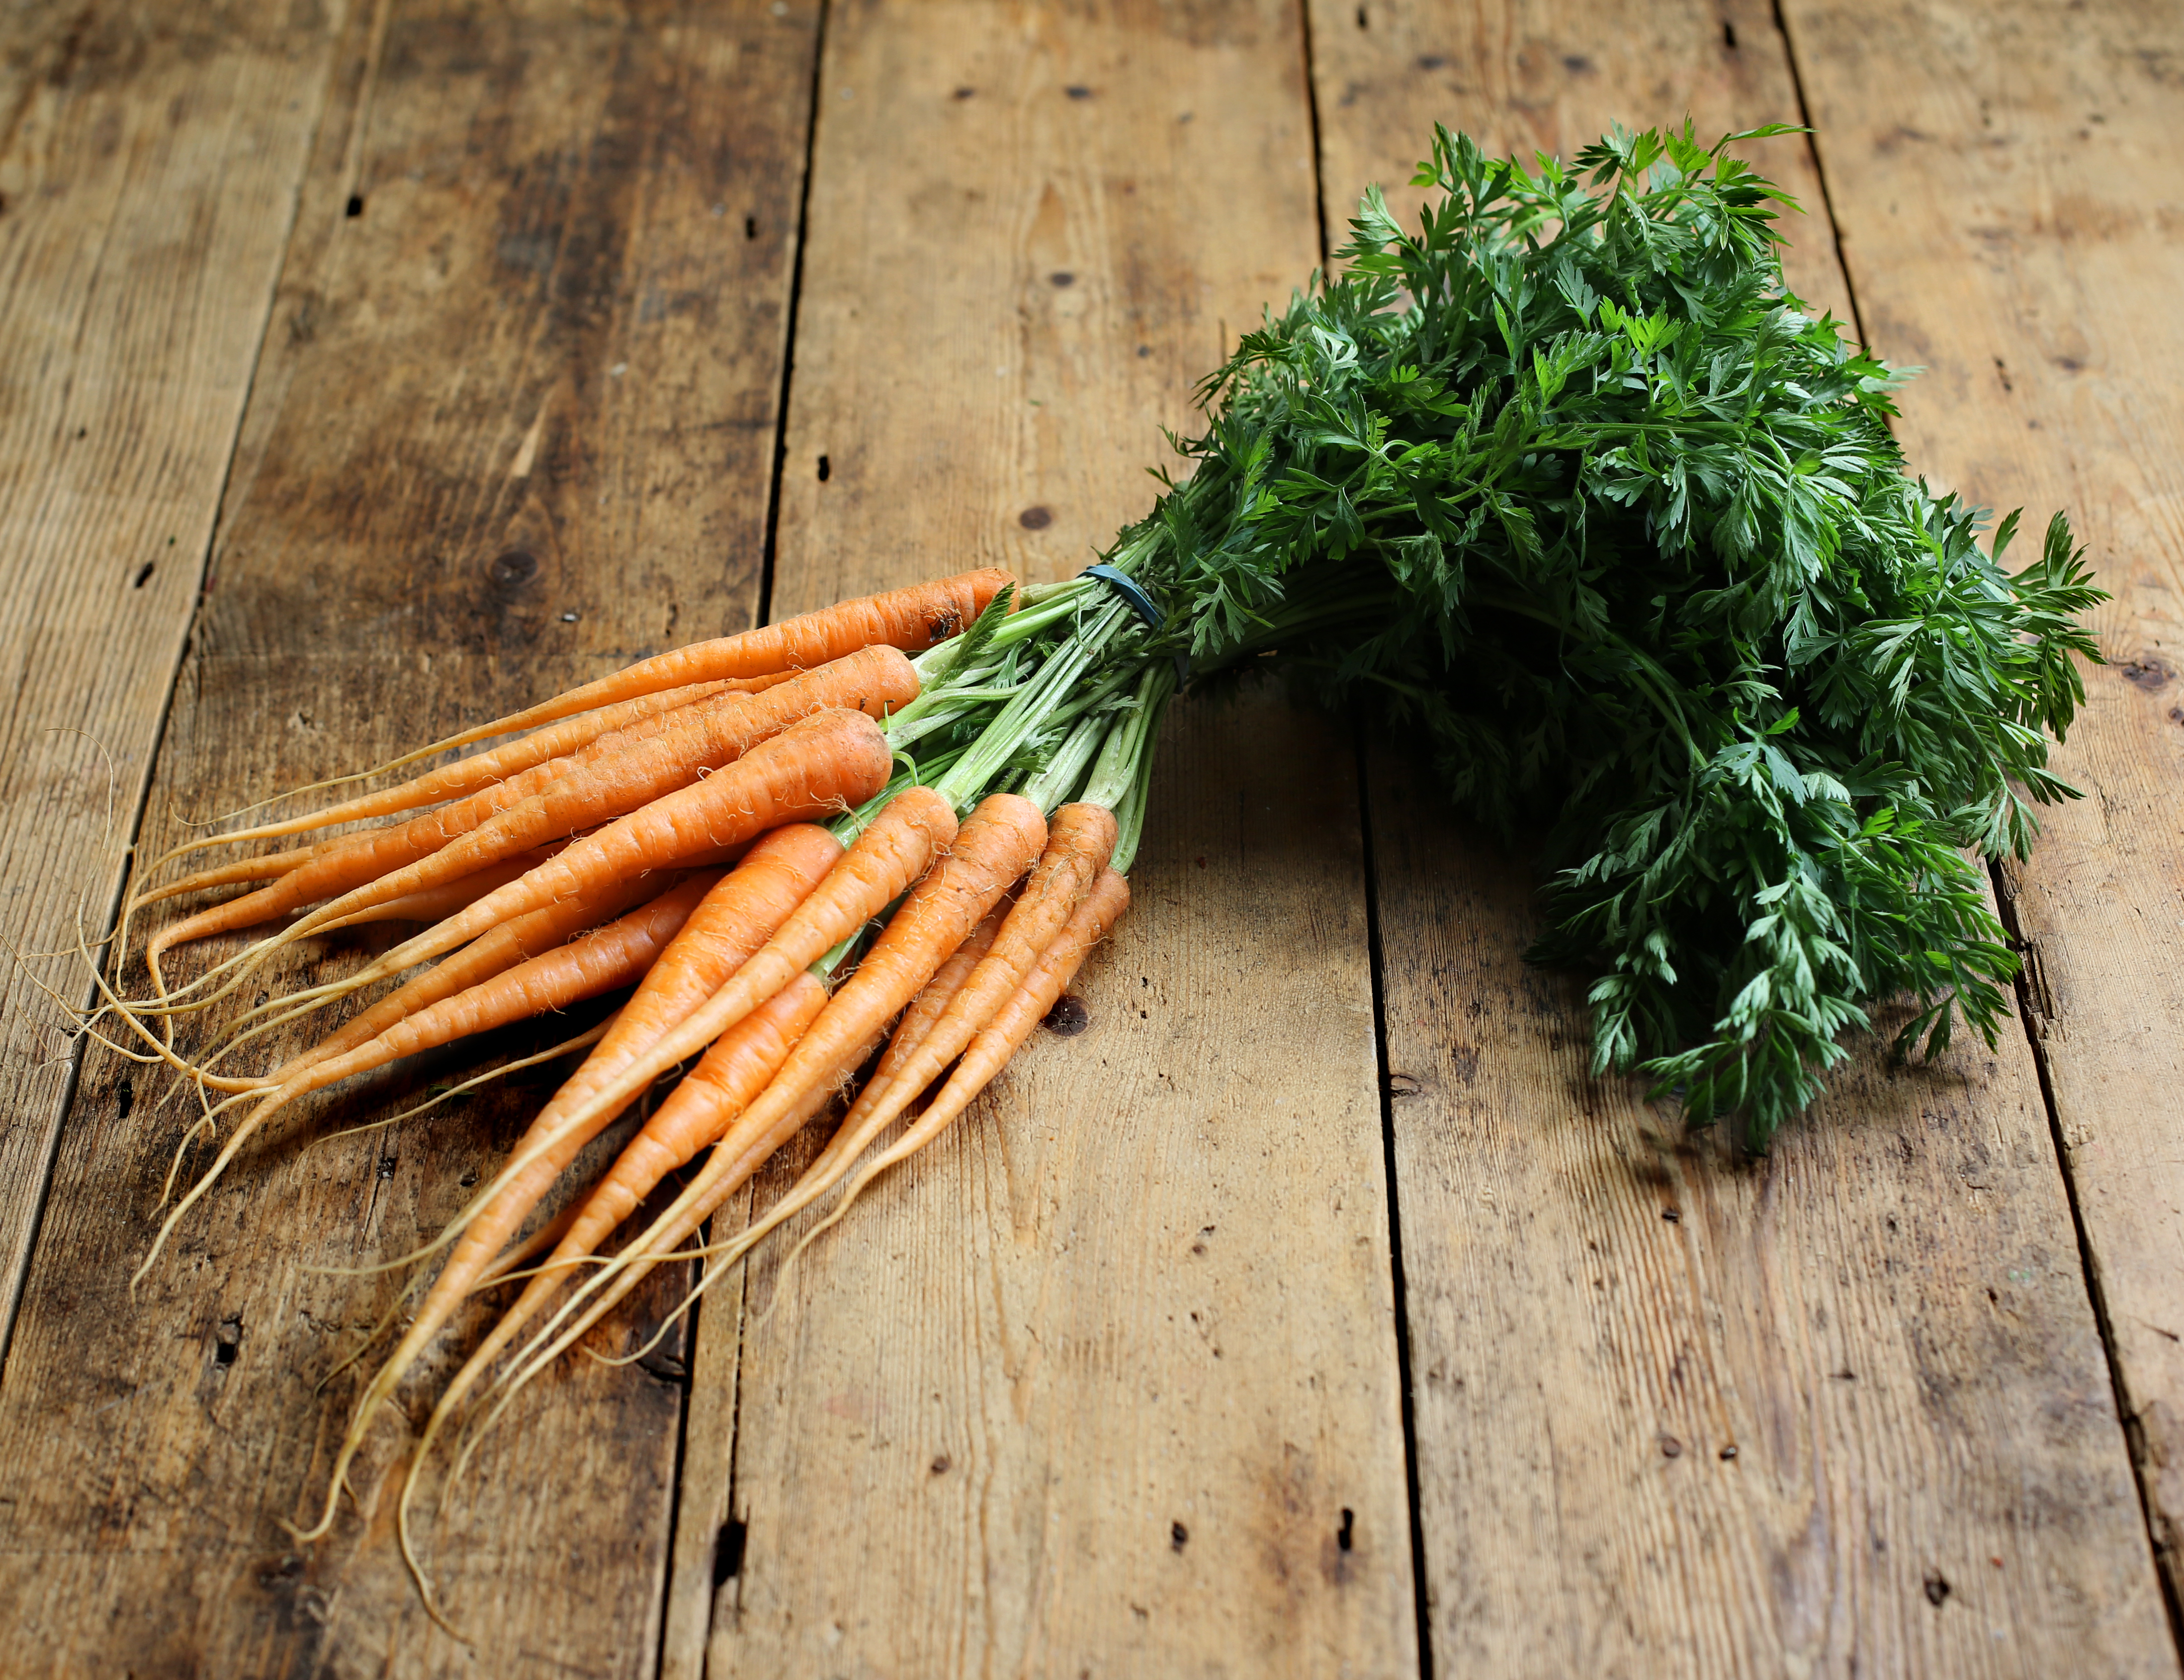 Bunched orange Carrots​